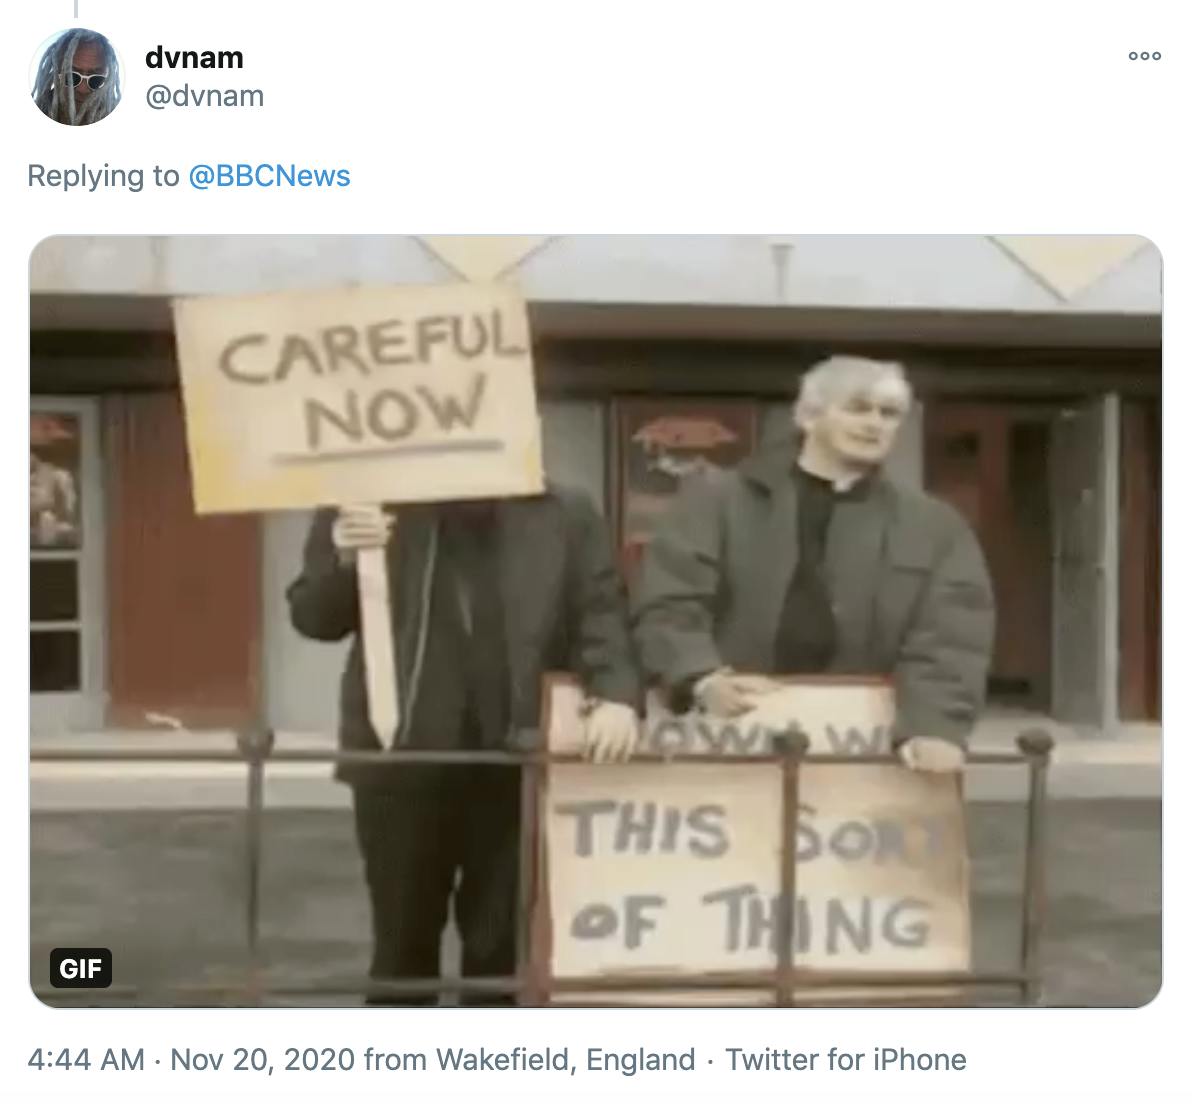 screenshot from Father Ted showing the two priests holding placards saying 'careful now' and 'down with this sort of thing'